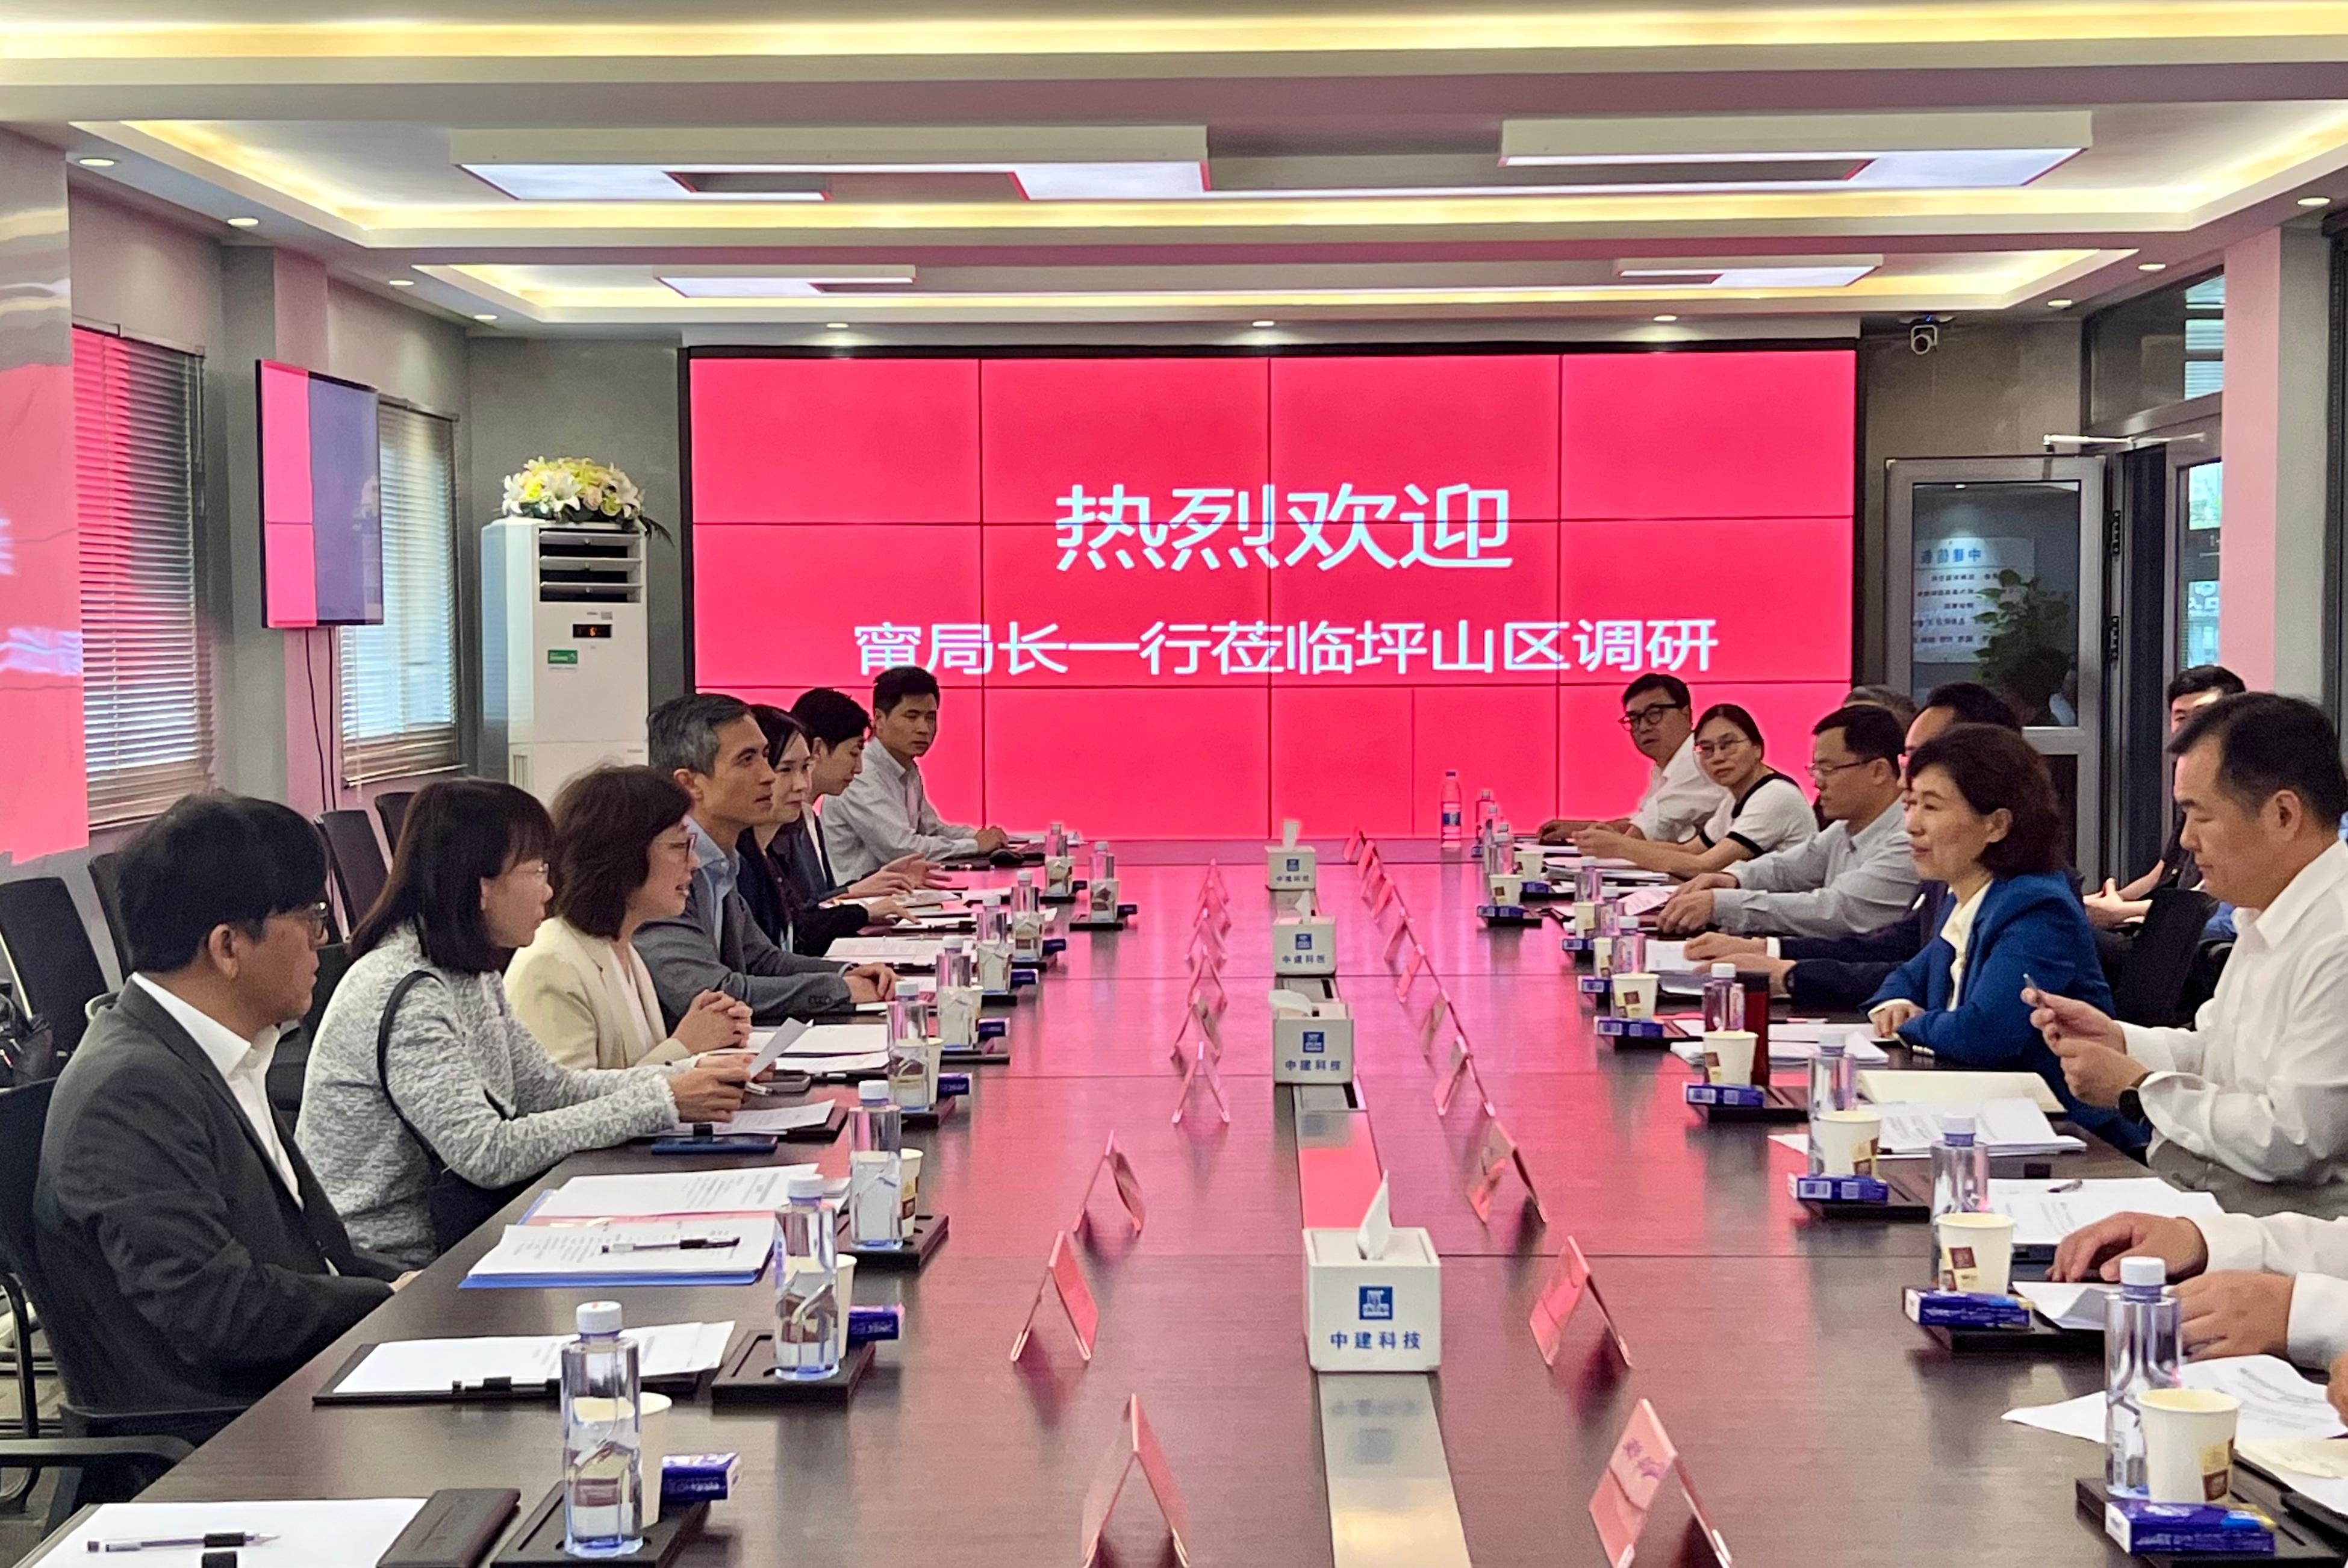 The Secretary for Development, Ms Bernadette Linn, and the Director of the Northern Metropolis Co-ordination Office, Mr Vic Yau, today (March 28) visited Luohu District and Pingshan District of Shenzhen. Photo shows Ms Linn (third left) and Mr Yau (fourth left) being briefed on the experiences in developing industrial space in Pingshan District and the Baguang sub-district of Dapeng New District.